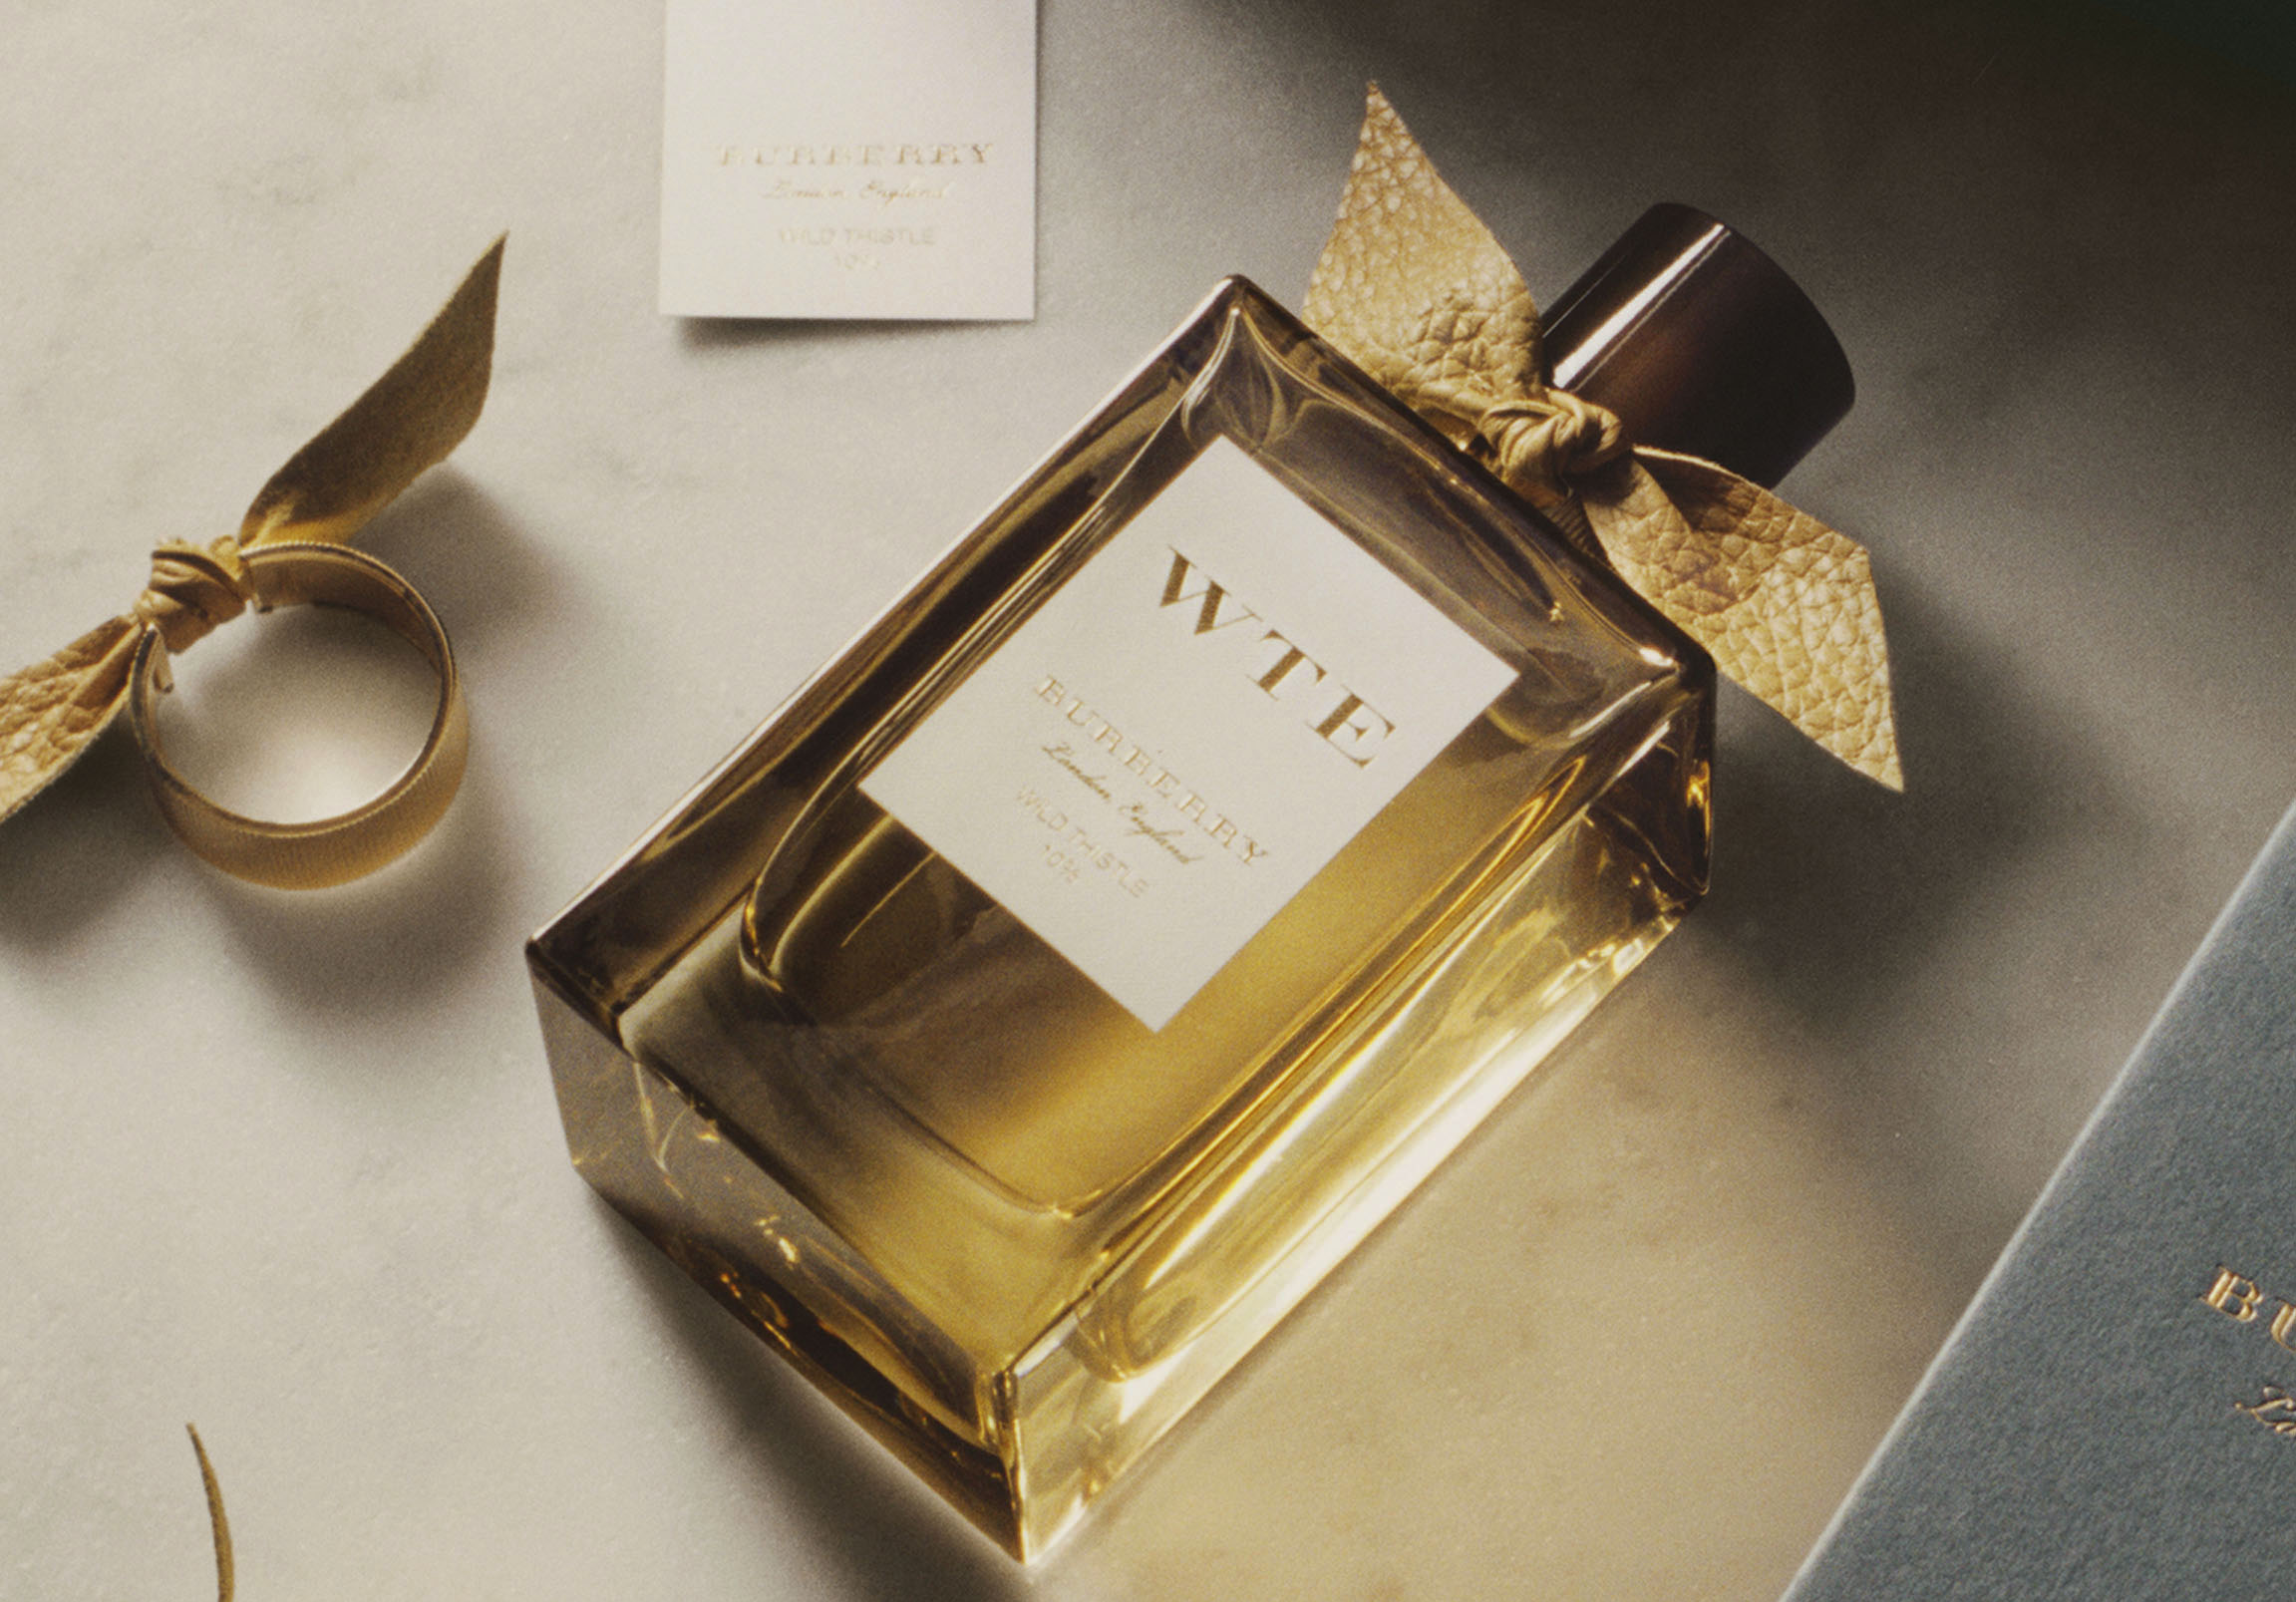 Burberry introduces Bespoke Collection of exclusive fragrances